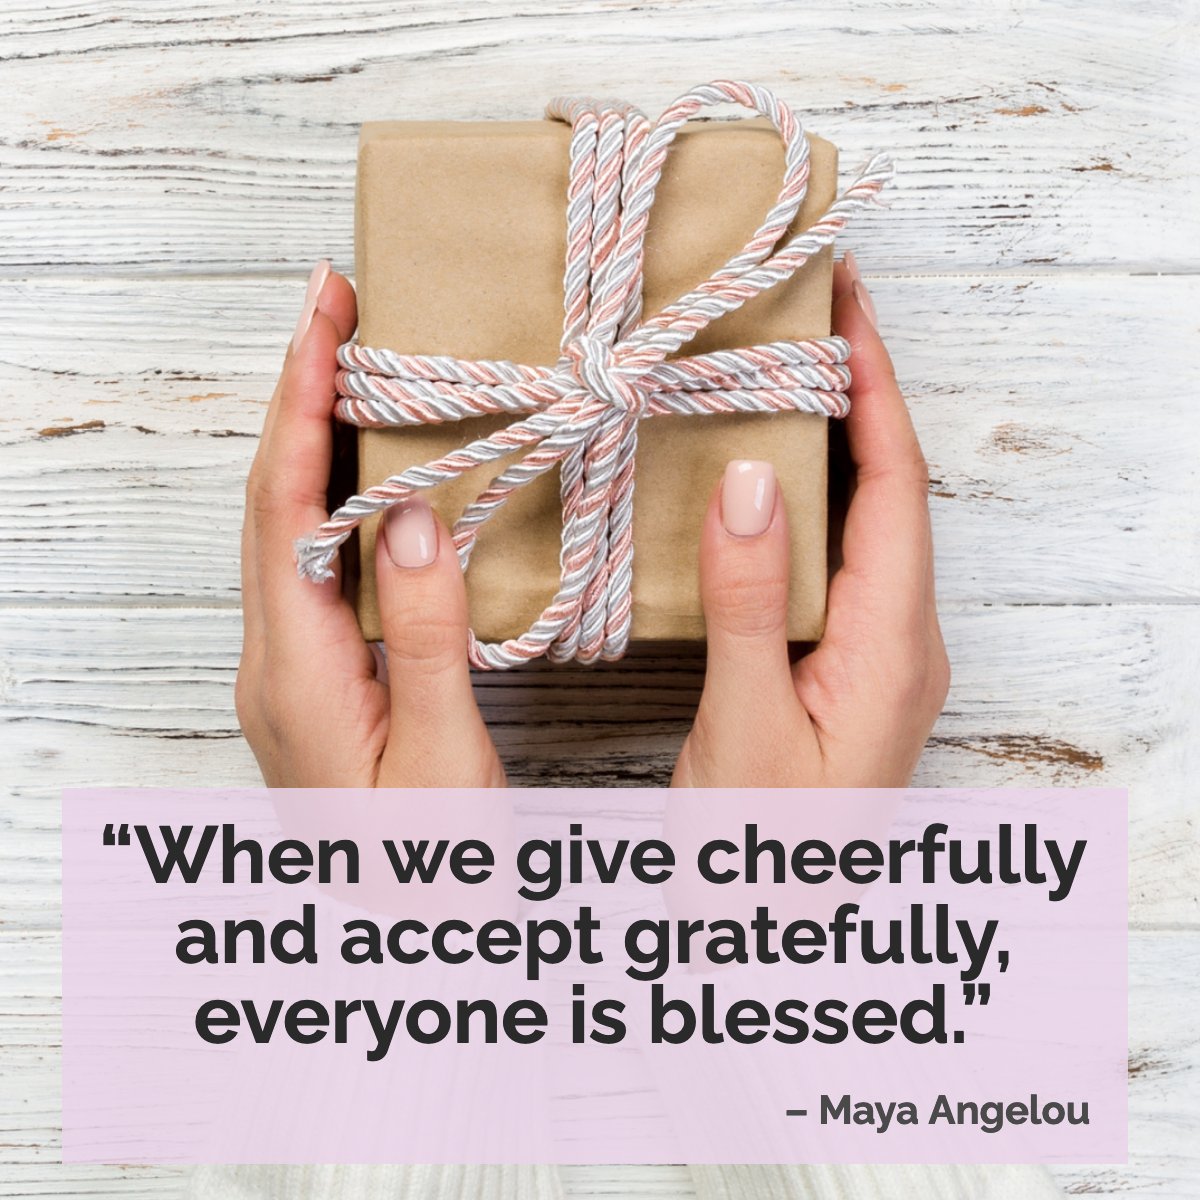 'When we give cheerfully and accept gratefully, everyone is blessed.' 
— Maya Angelou 🙏

 #wisdomquote #wisdomoftheday #quotegram #quoteoftheday✏️  #educationispower
 #homesinsdcounty #sandiego